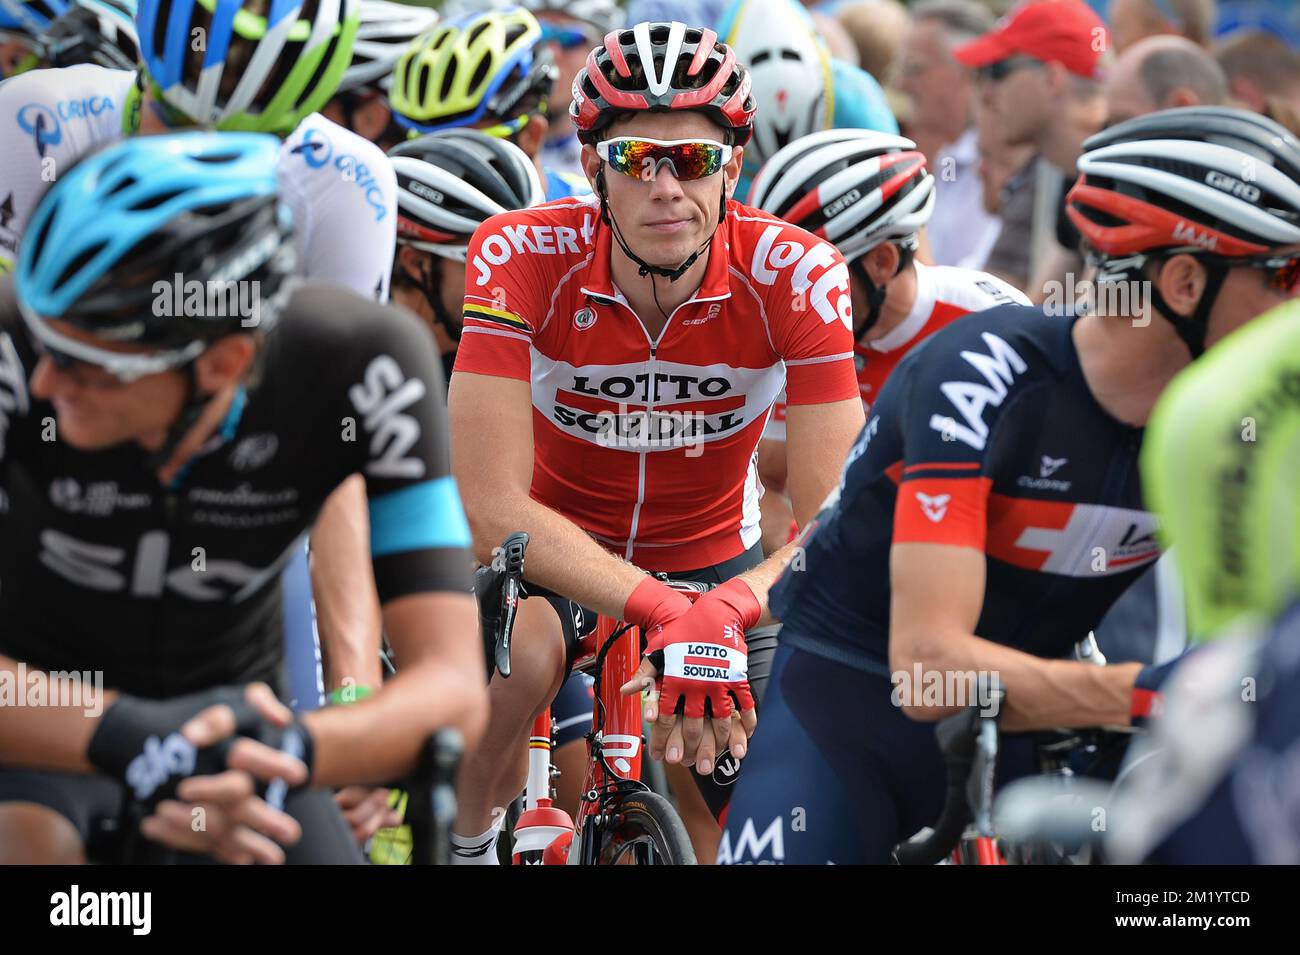 Belgian Stig Broeckx of Lotto - Soudal pictured at the start of the 5th stage of the Eneco Tour cycling race, 179,6 km from Riemst to Sittard-Geleen, Friday 14 August 2015, The Netherlands.  Stock Photo